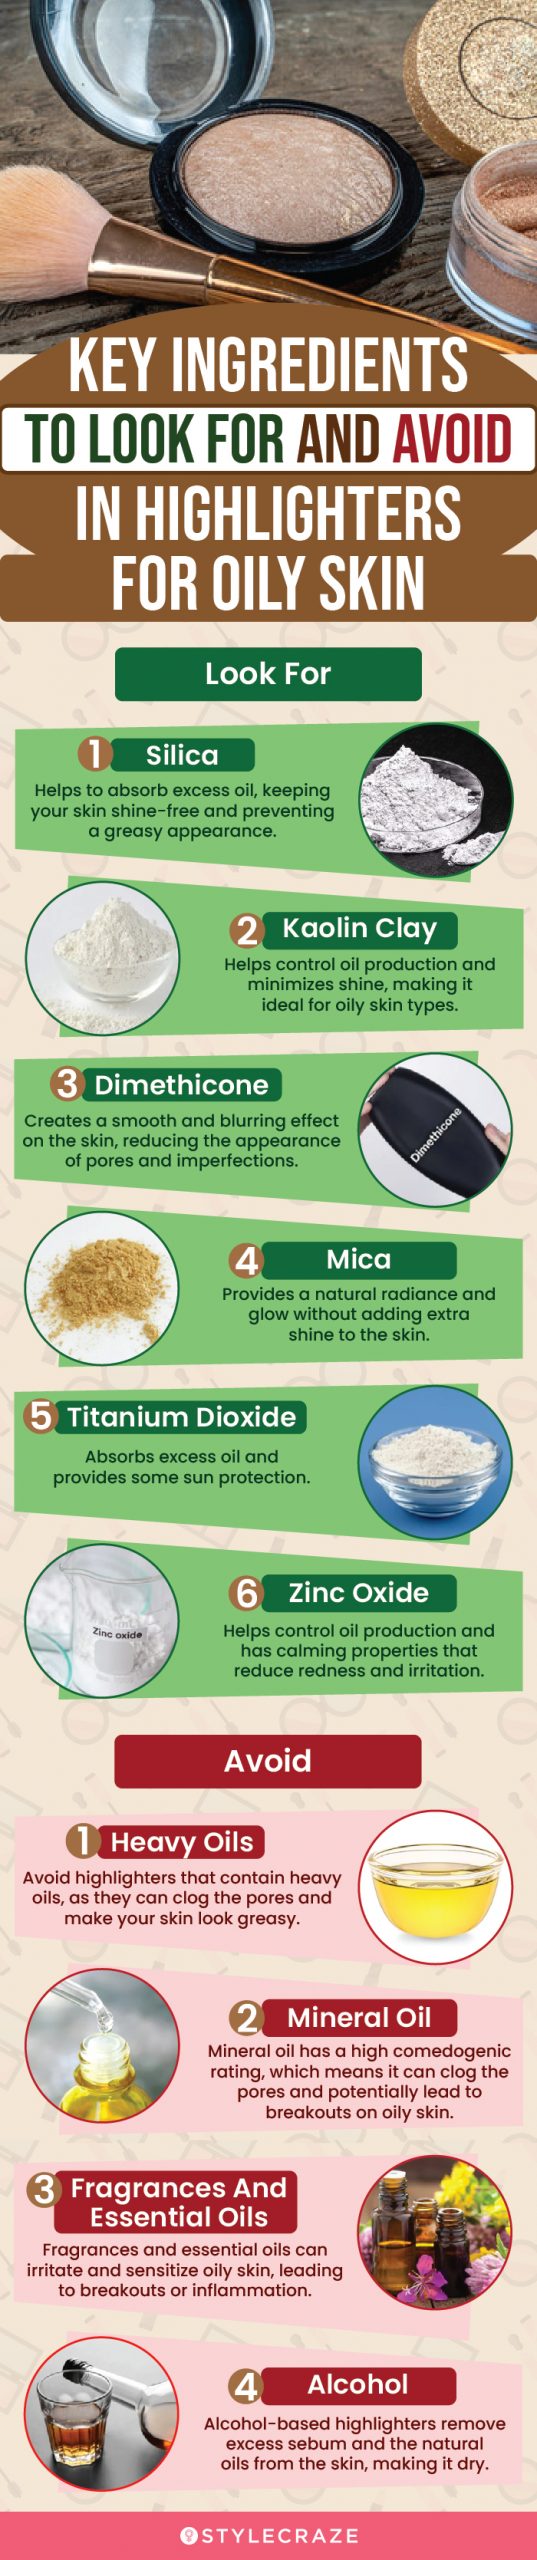 Key Ingredients To Look For And Avoid In Highlighters For Oily Skin(infographic)